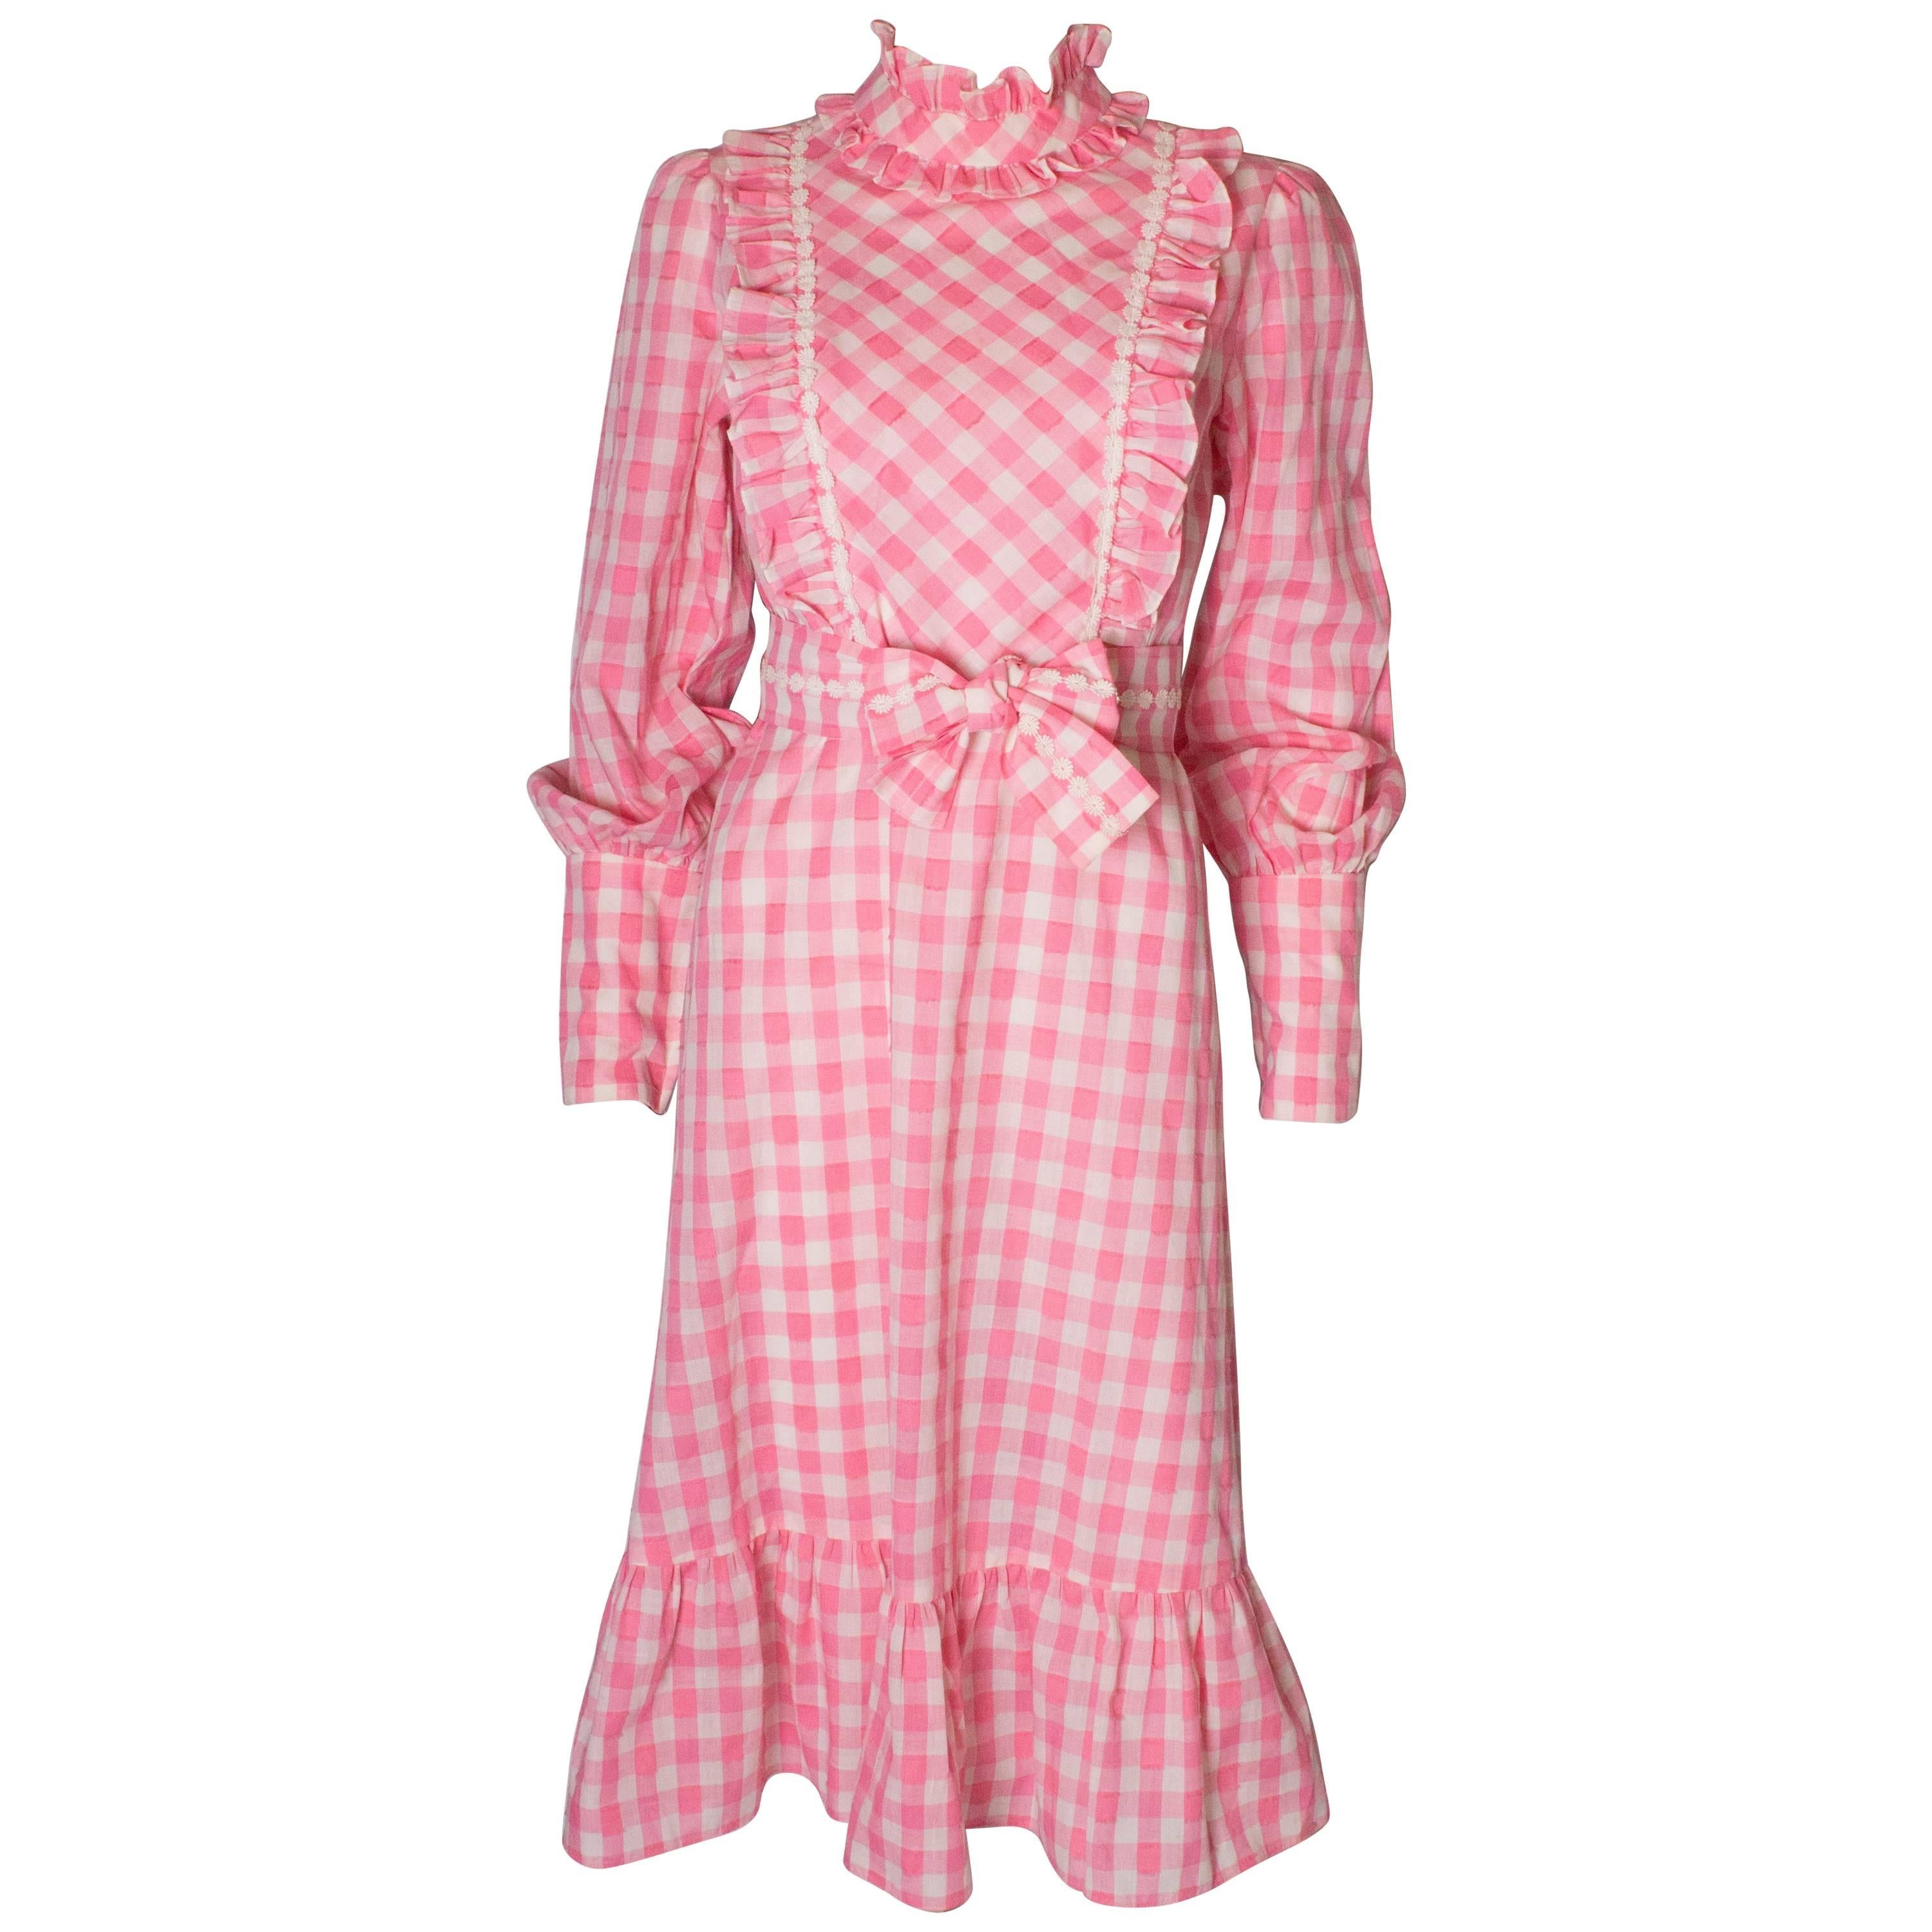 Vintage Susan Small Pink and White Dress